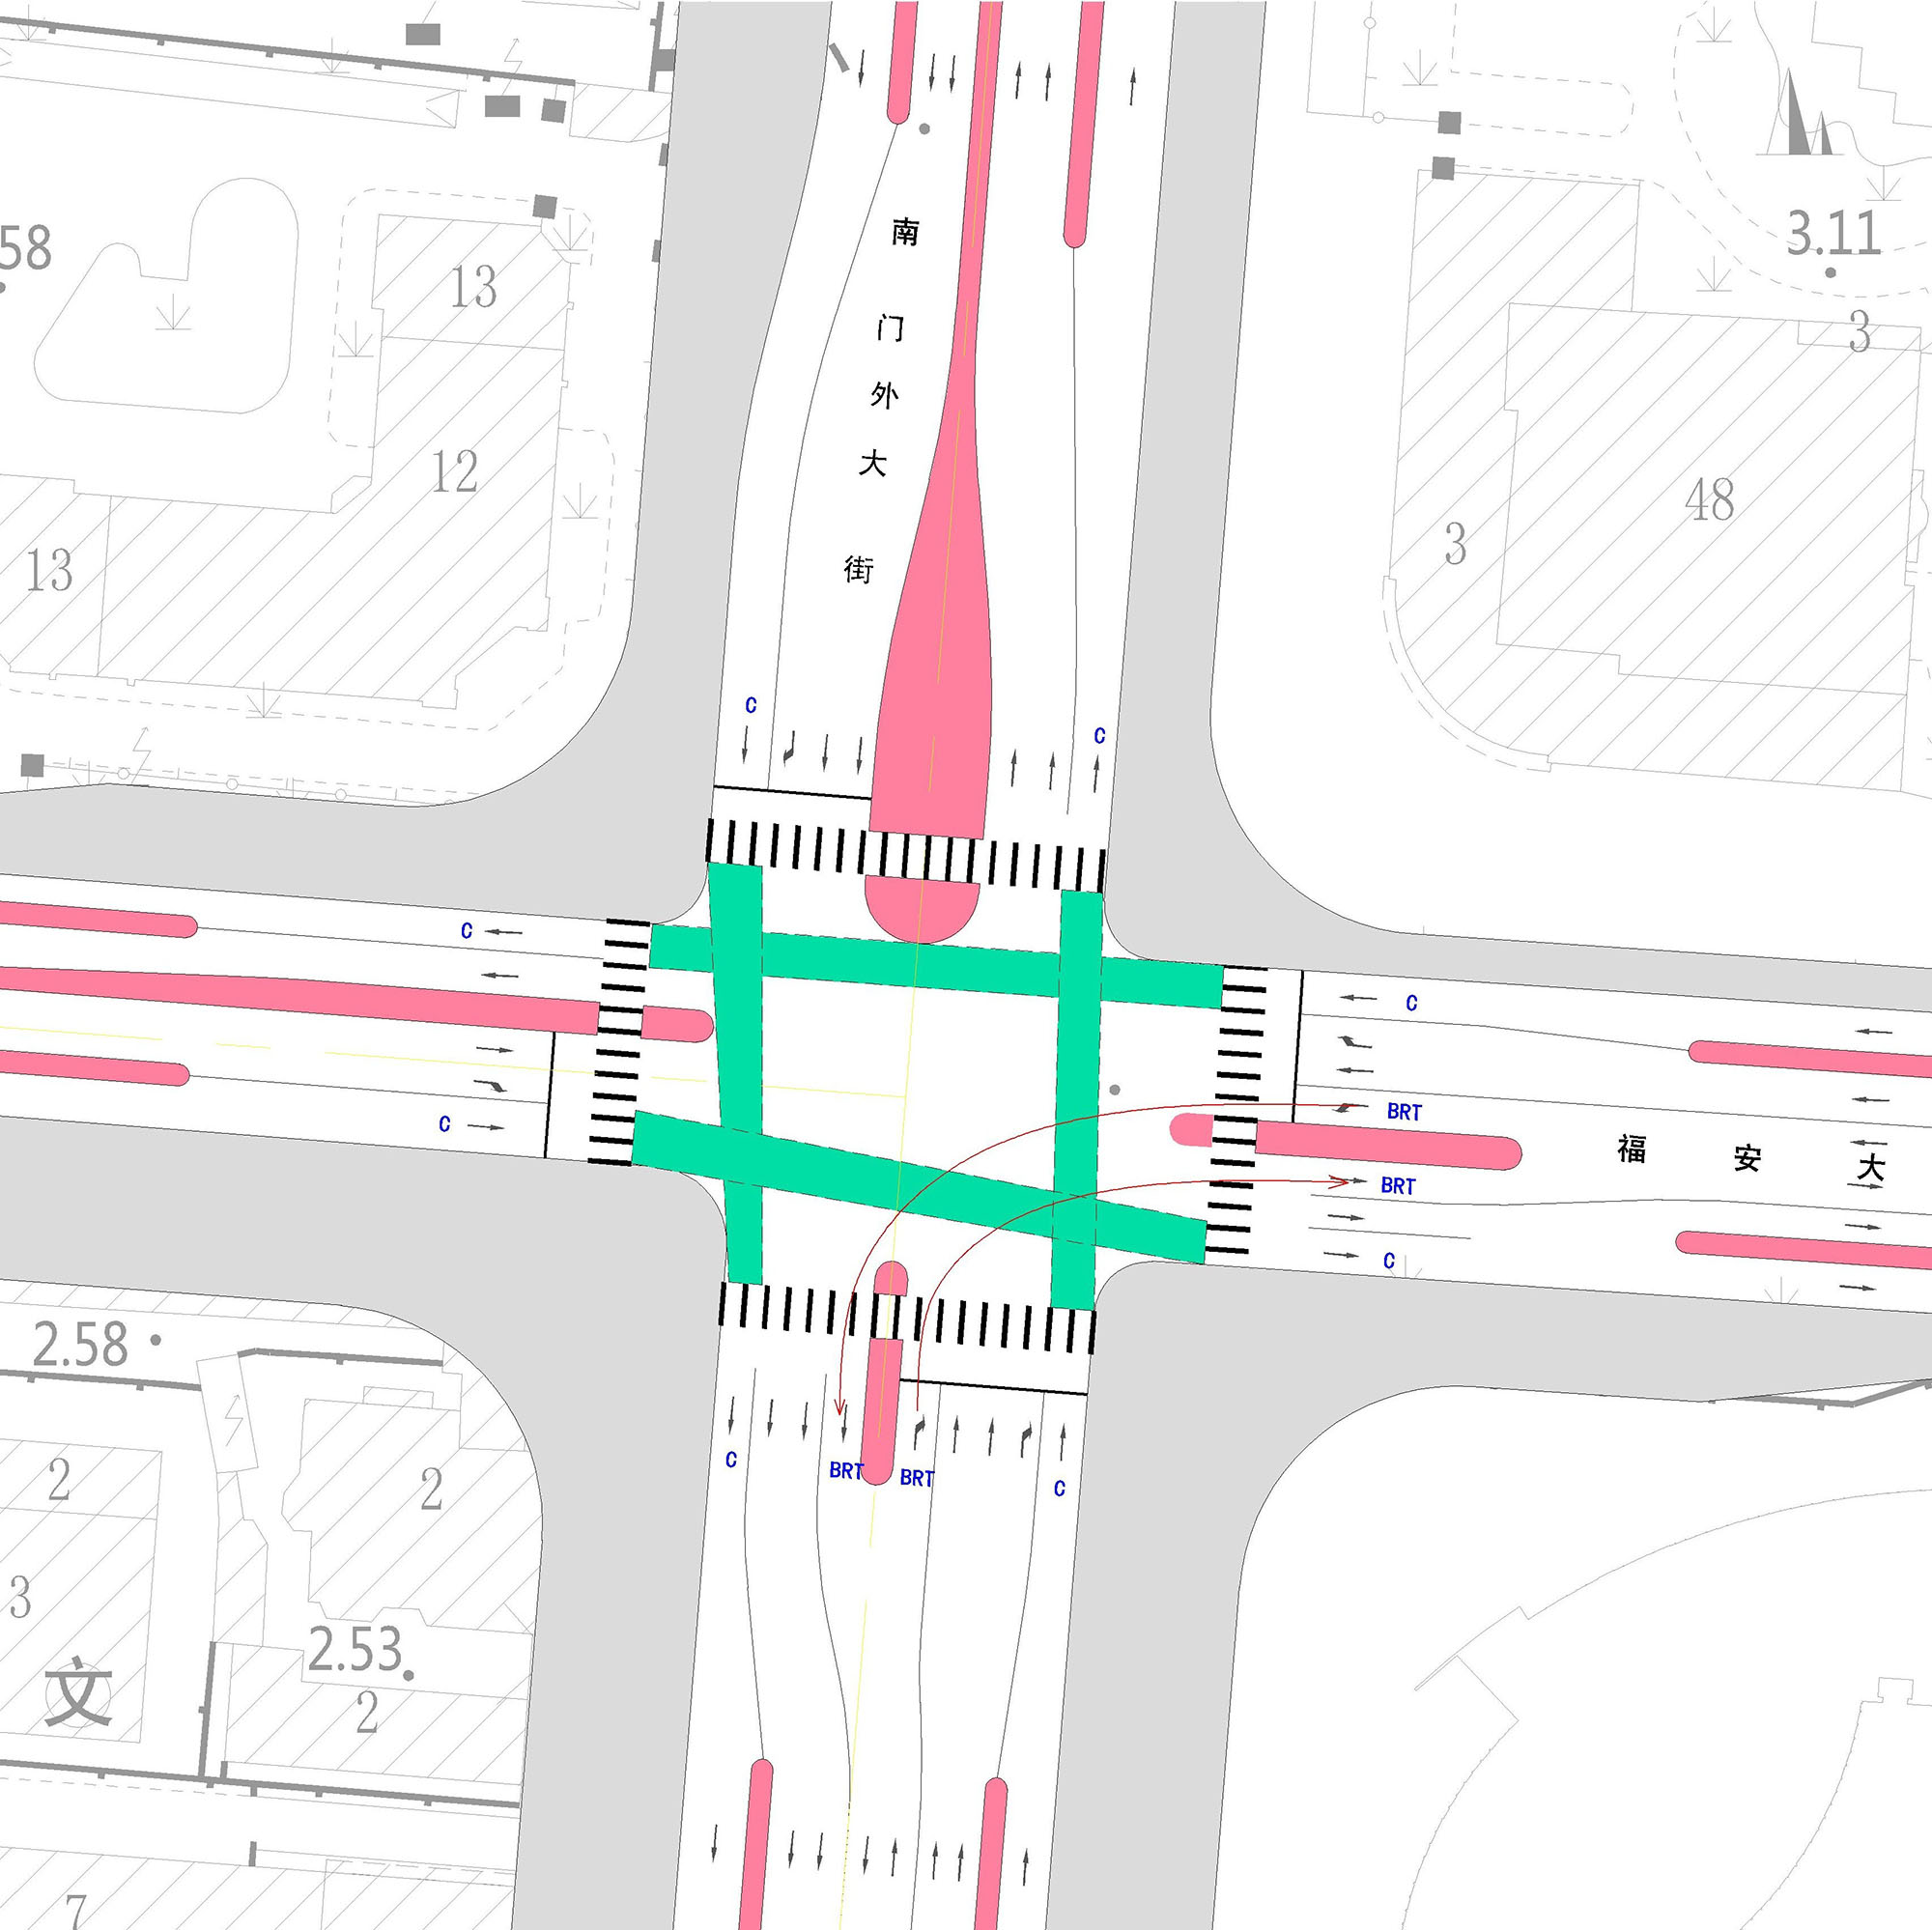 Fig. 31.23 A design for cycle lanes and BRT at an intersection in Tianjin, China. Note the green bike lanes extend through the intersection, and that the side medians end, allowing for a center median.